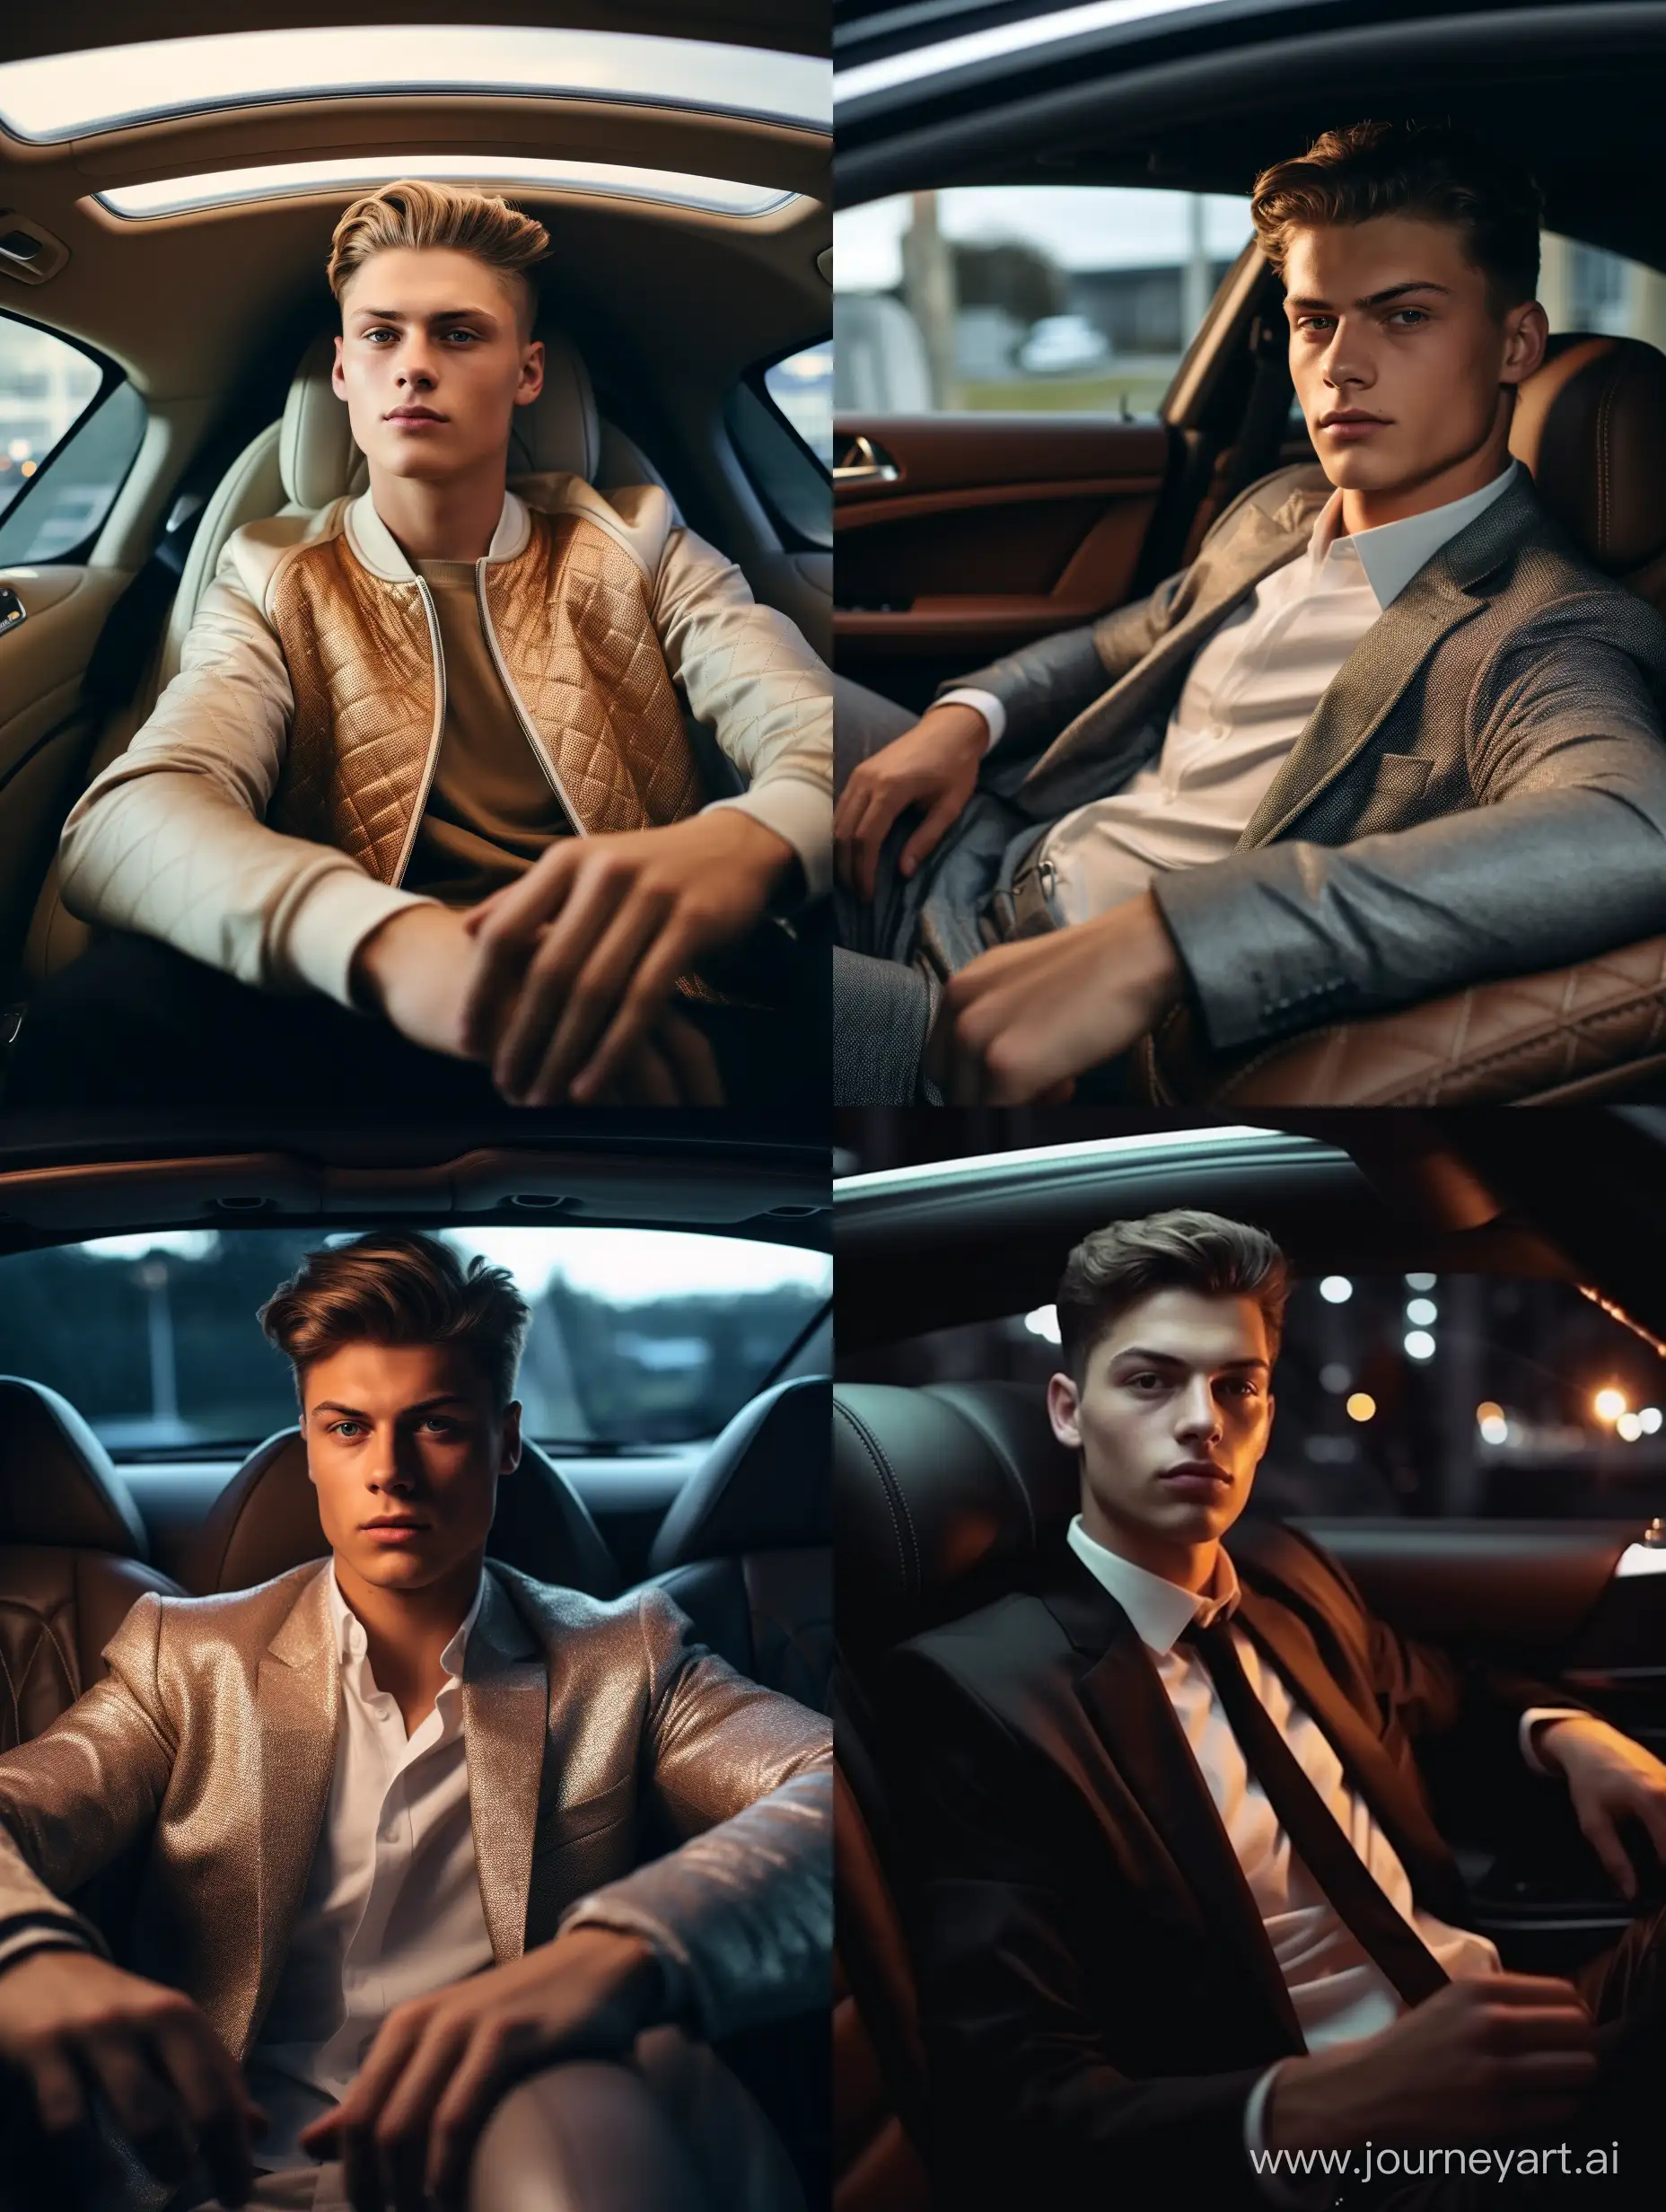 A sophisticated, realistic 4k cinematic photo,young adult, Not a mature 17 years old. European appearance with classical medium length haircut. He's wearing brand-new clothes. He is sitting in back seat of Mercedes maybach car, long exposure, close-up portrait